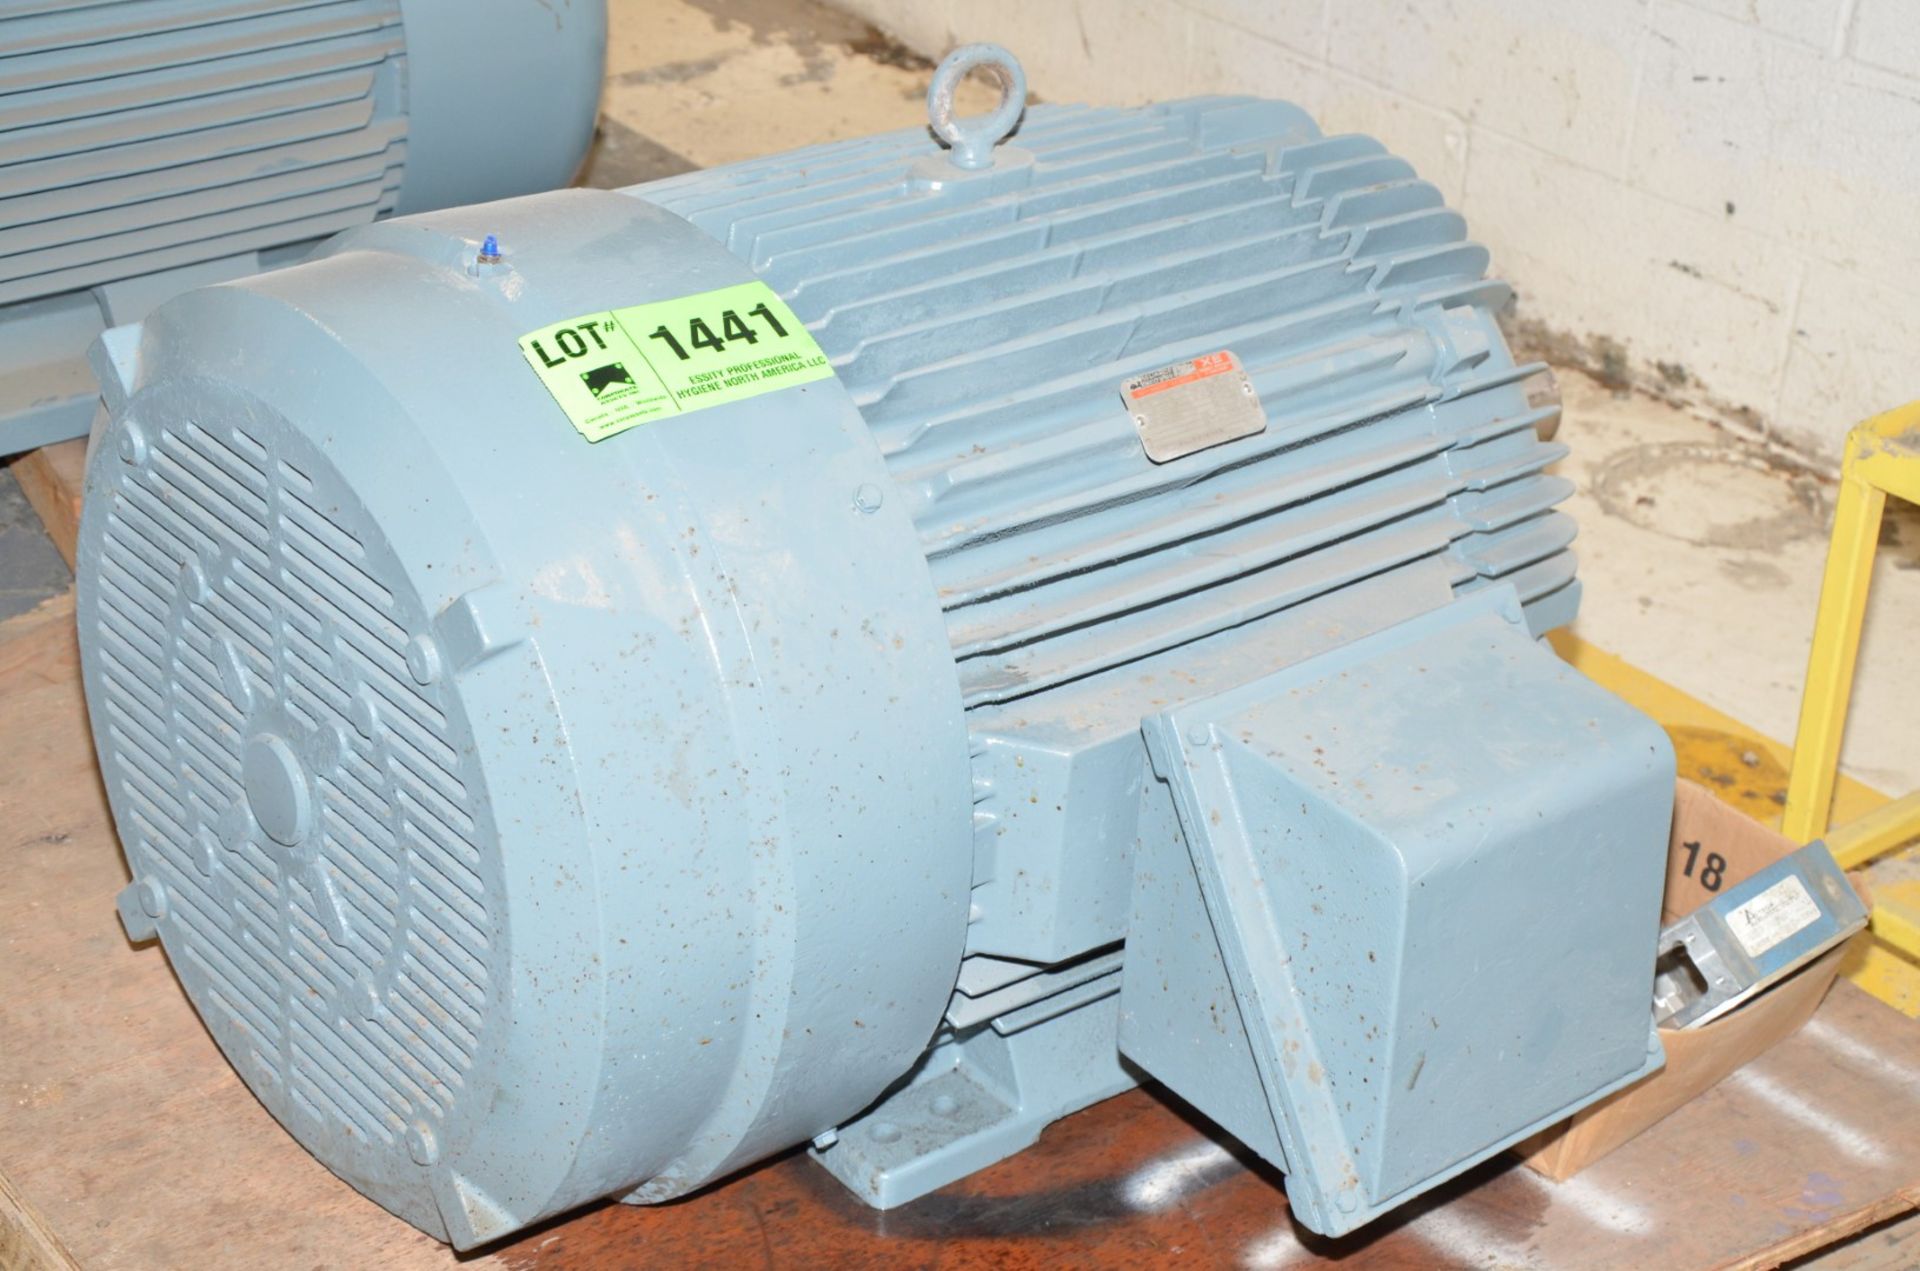 GE 125 HP 1785 RPM 460V ELECTRIC MOTOR [RIGGING FEE FOR LOT #1441 - $50 USD PLUS APPLICABLE TAXES]